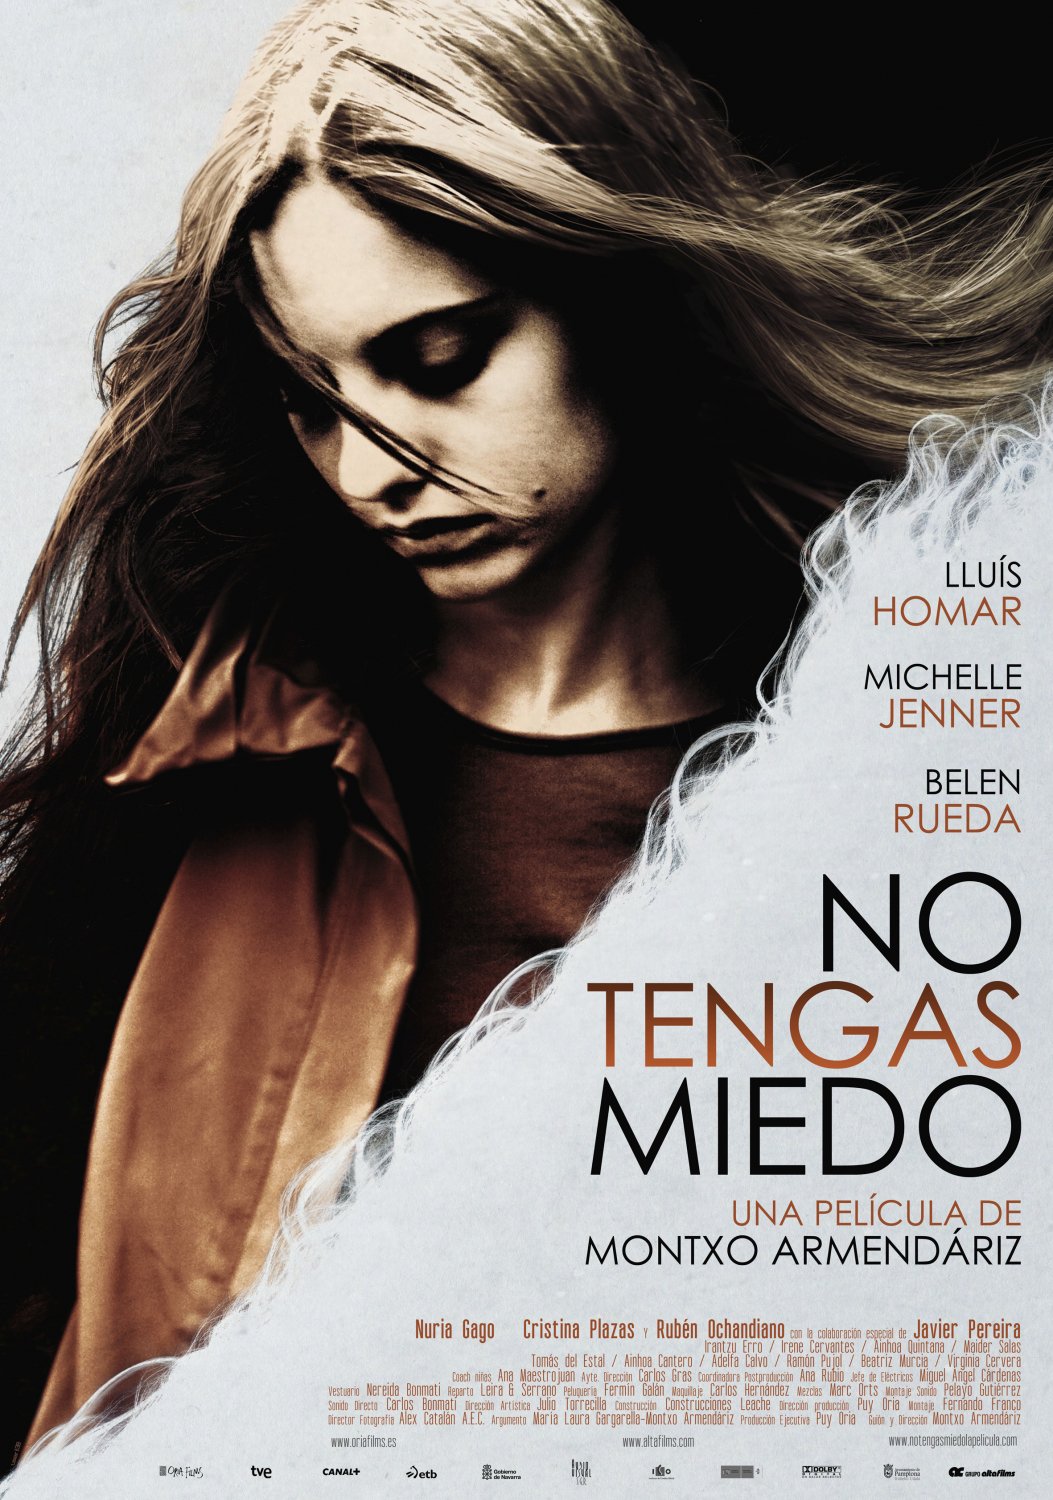 Extra Large Movie Poster Image for No tengas miedo 